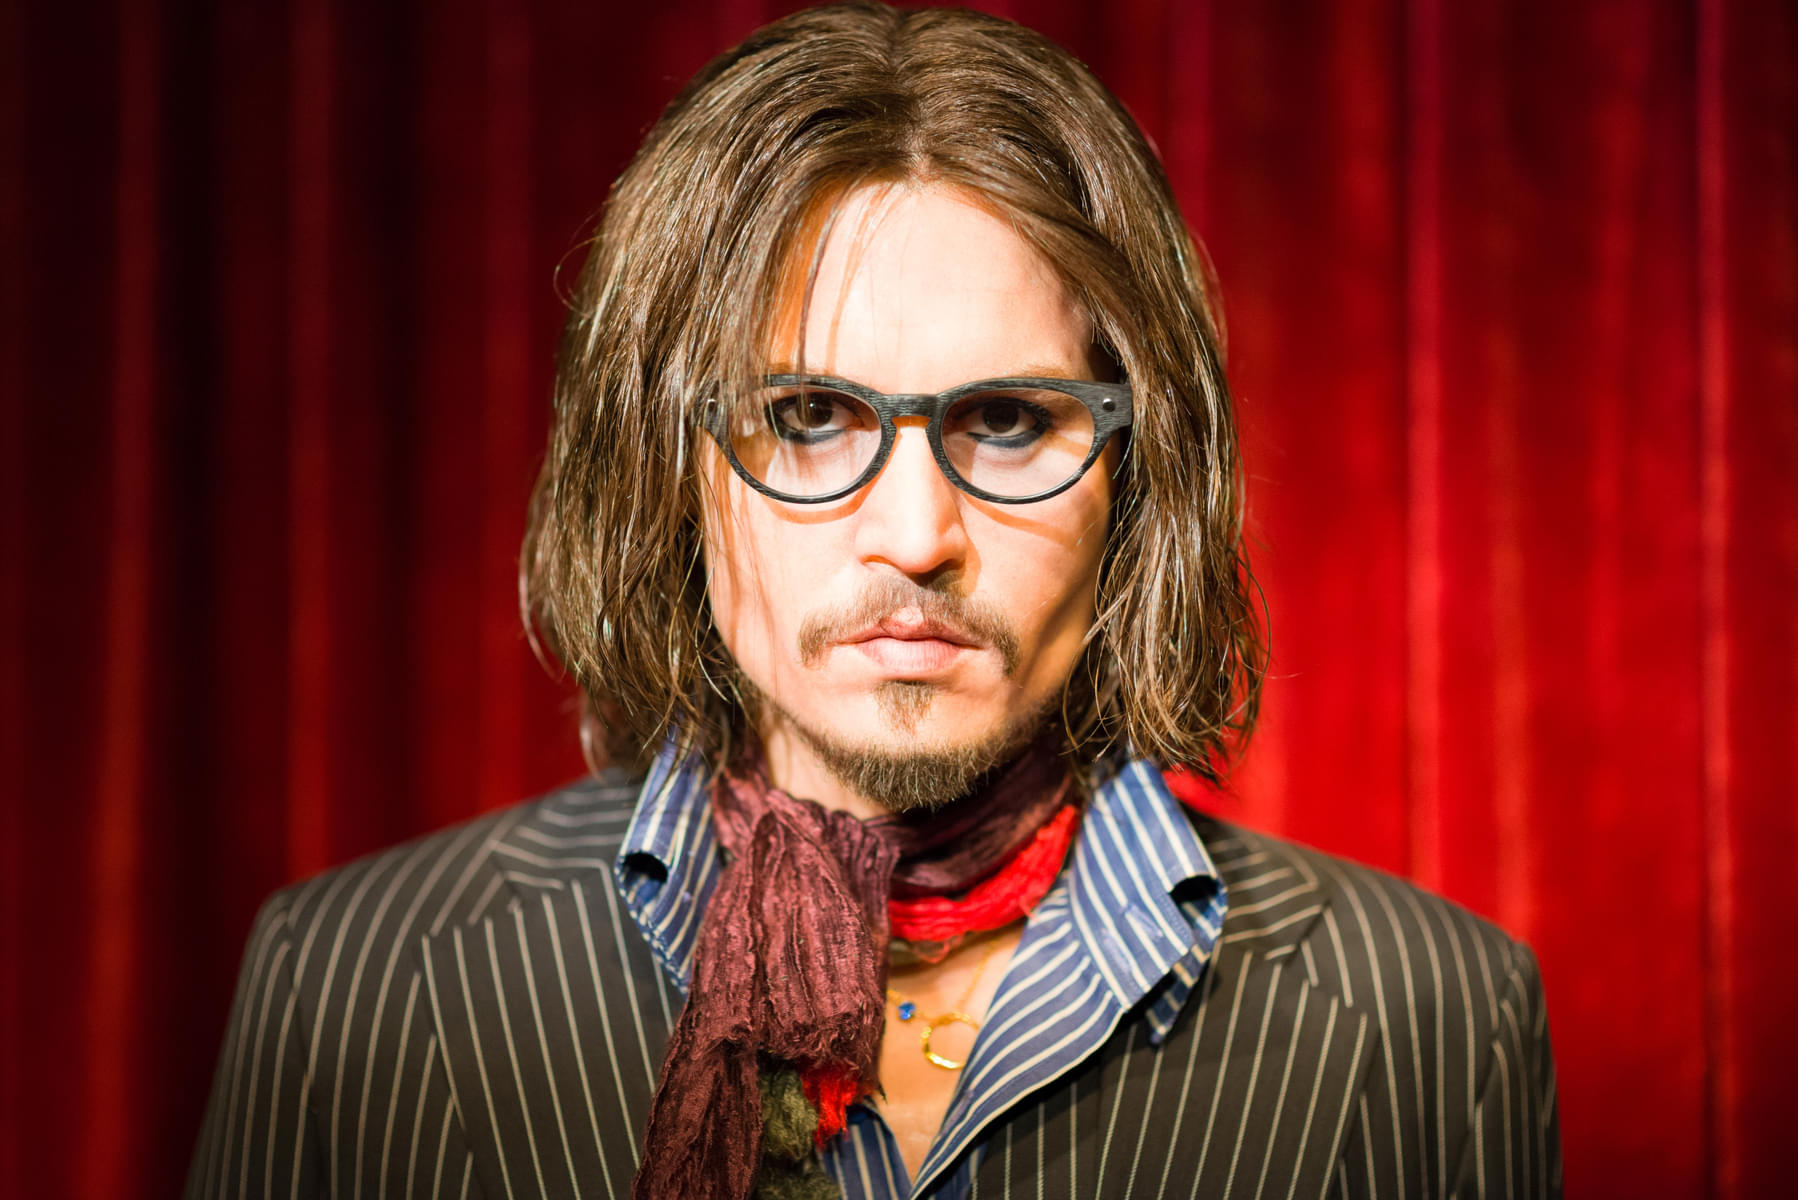 See the wax statue of Johnny Depp at Madame Tussauds